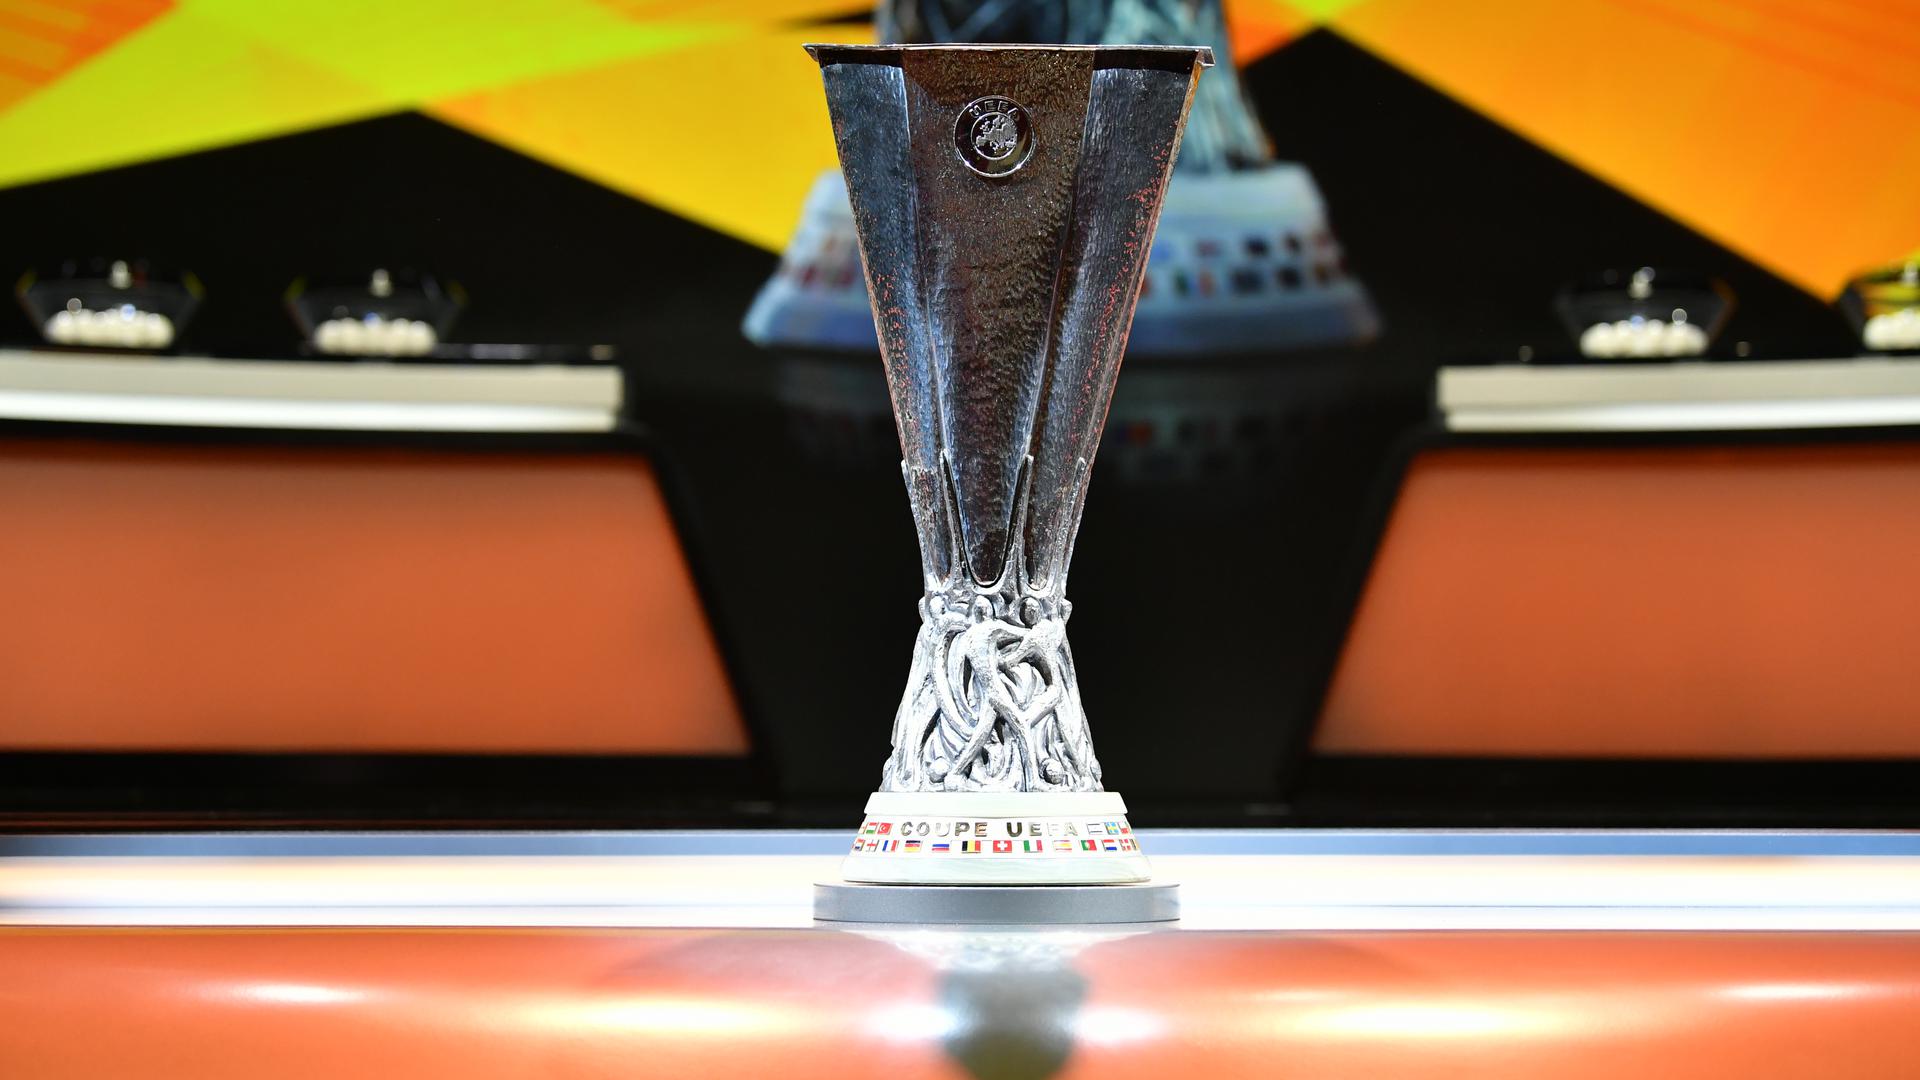 When Is The Round Of 32 Europa League Draw Involving Man Utd Manchester United